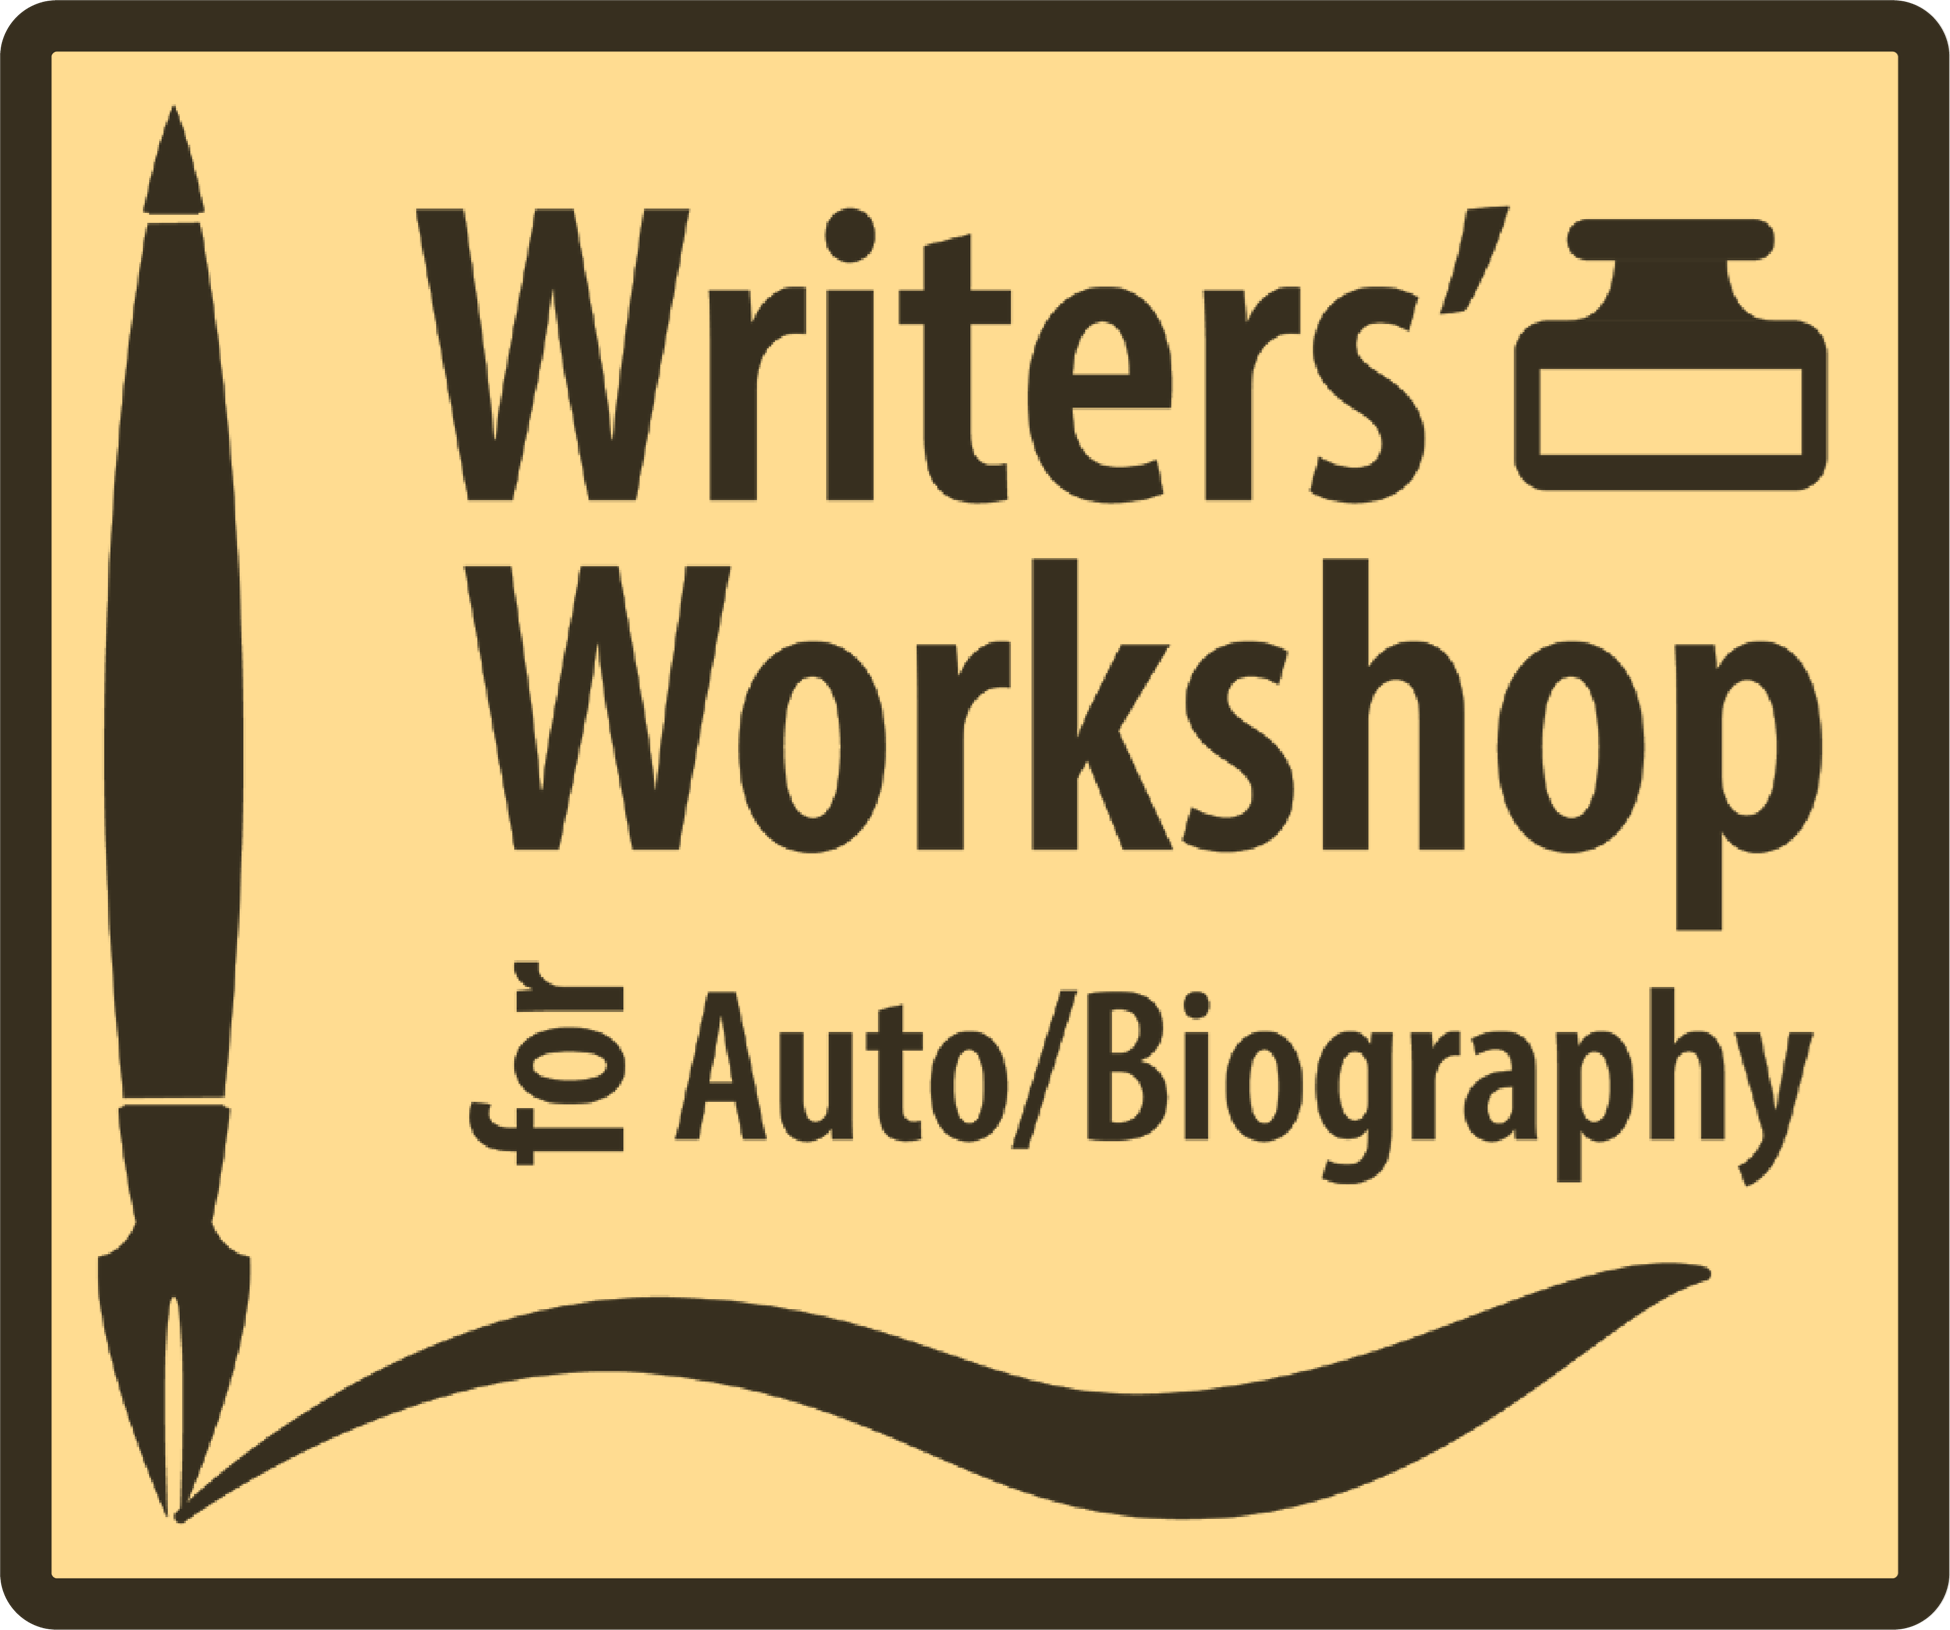 Writers' workshop for Auto/Biography